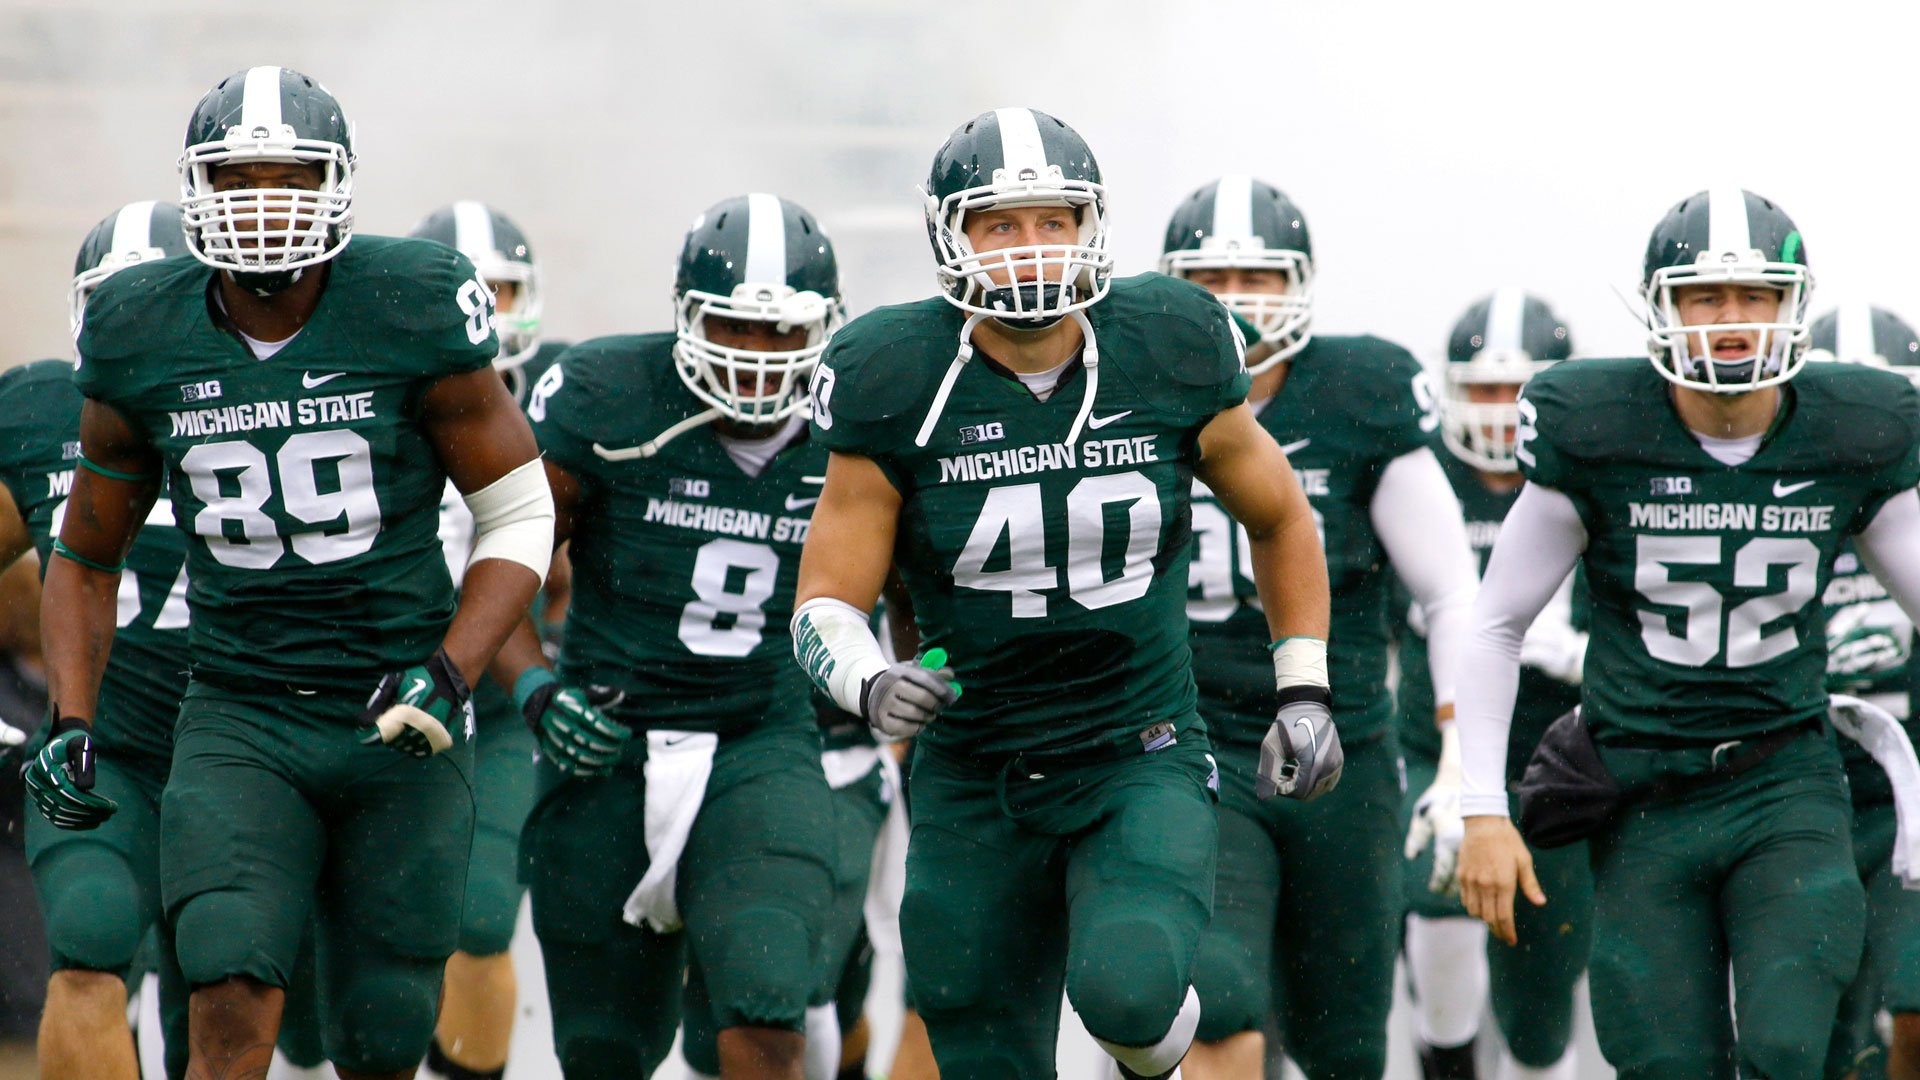 1920x1080 MICHIGAN STATE SPARTANS college football wallpaper |  | 595893 |  WallpaperUP